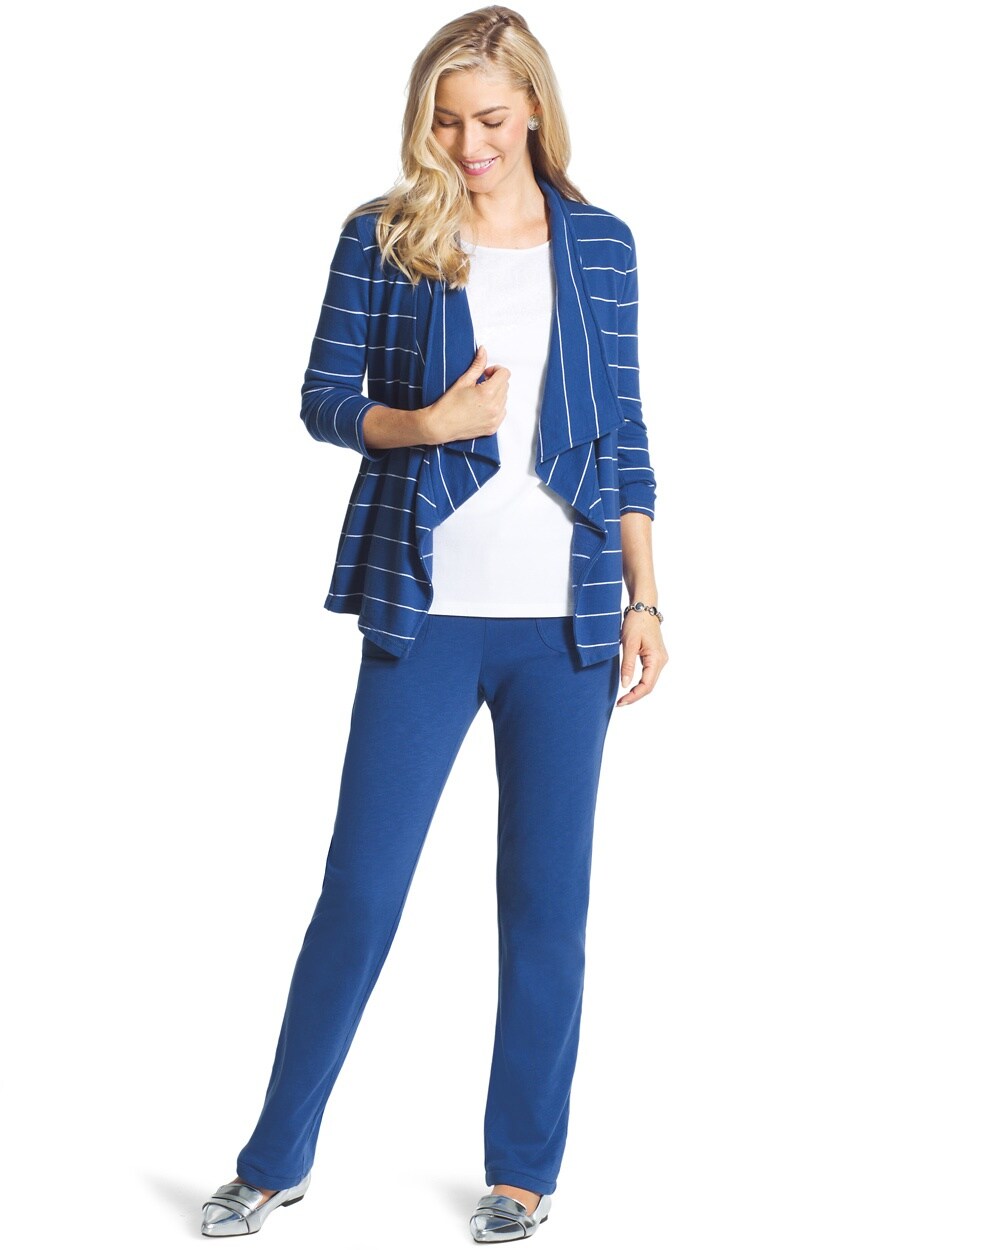 Zenergy Open Front Striped Jacket - Chico's